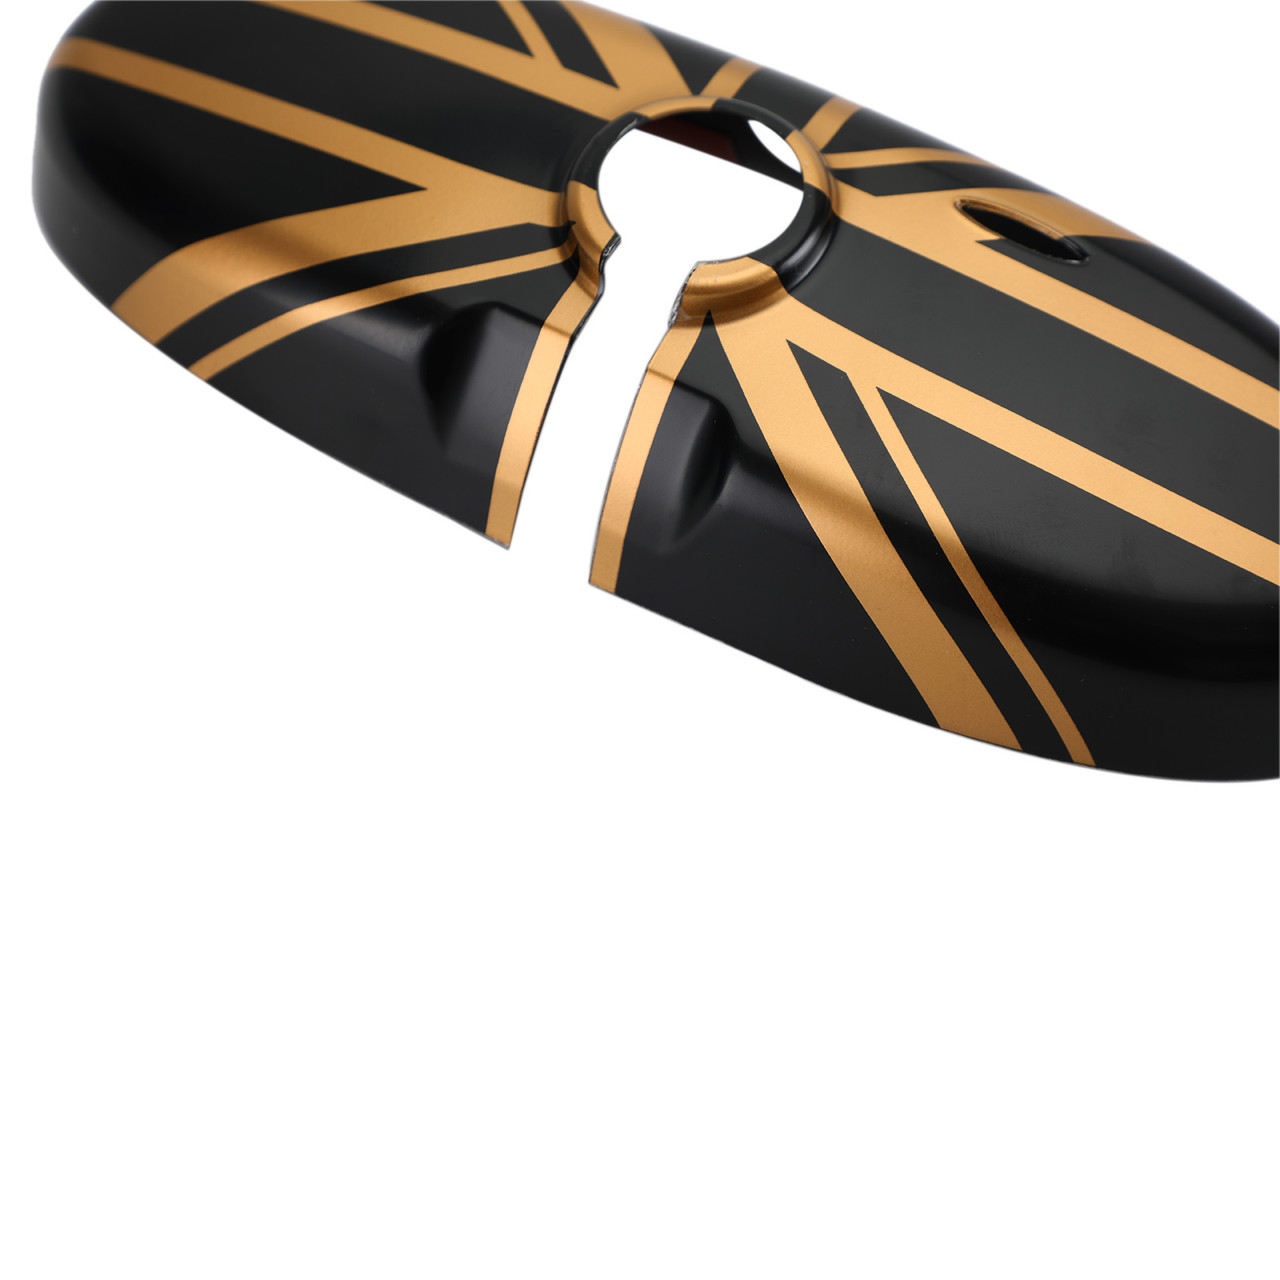 Union Jack UK Flag Rear View Mirror Cover Fit For MINI Cooper R55 R56 R57 Black/Gold